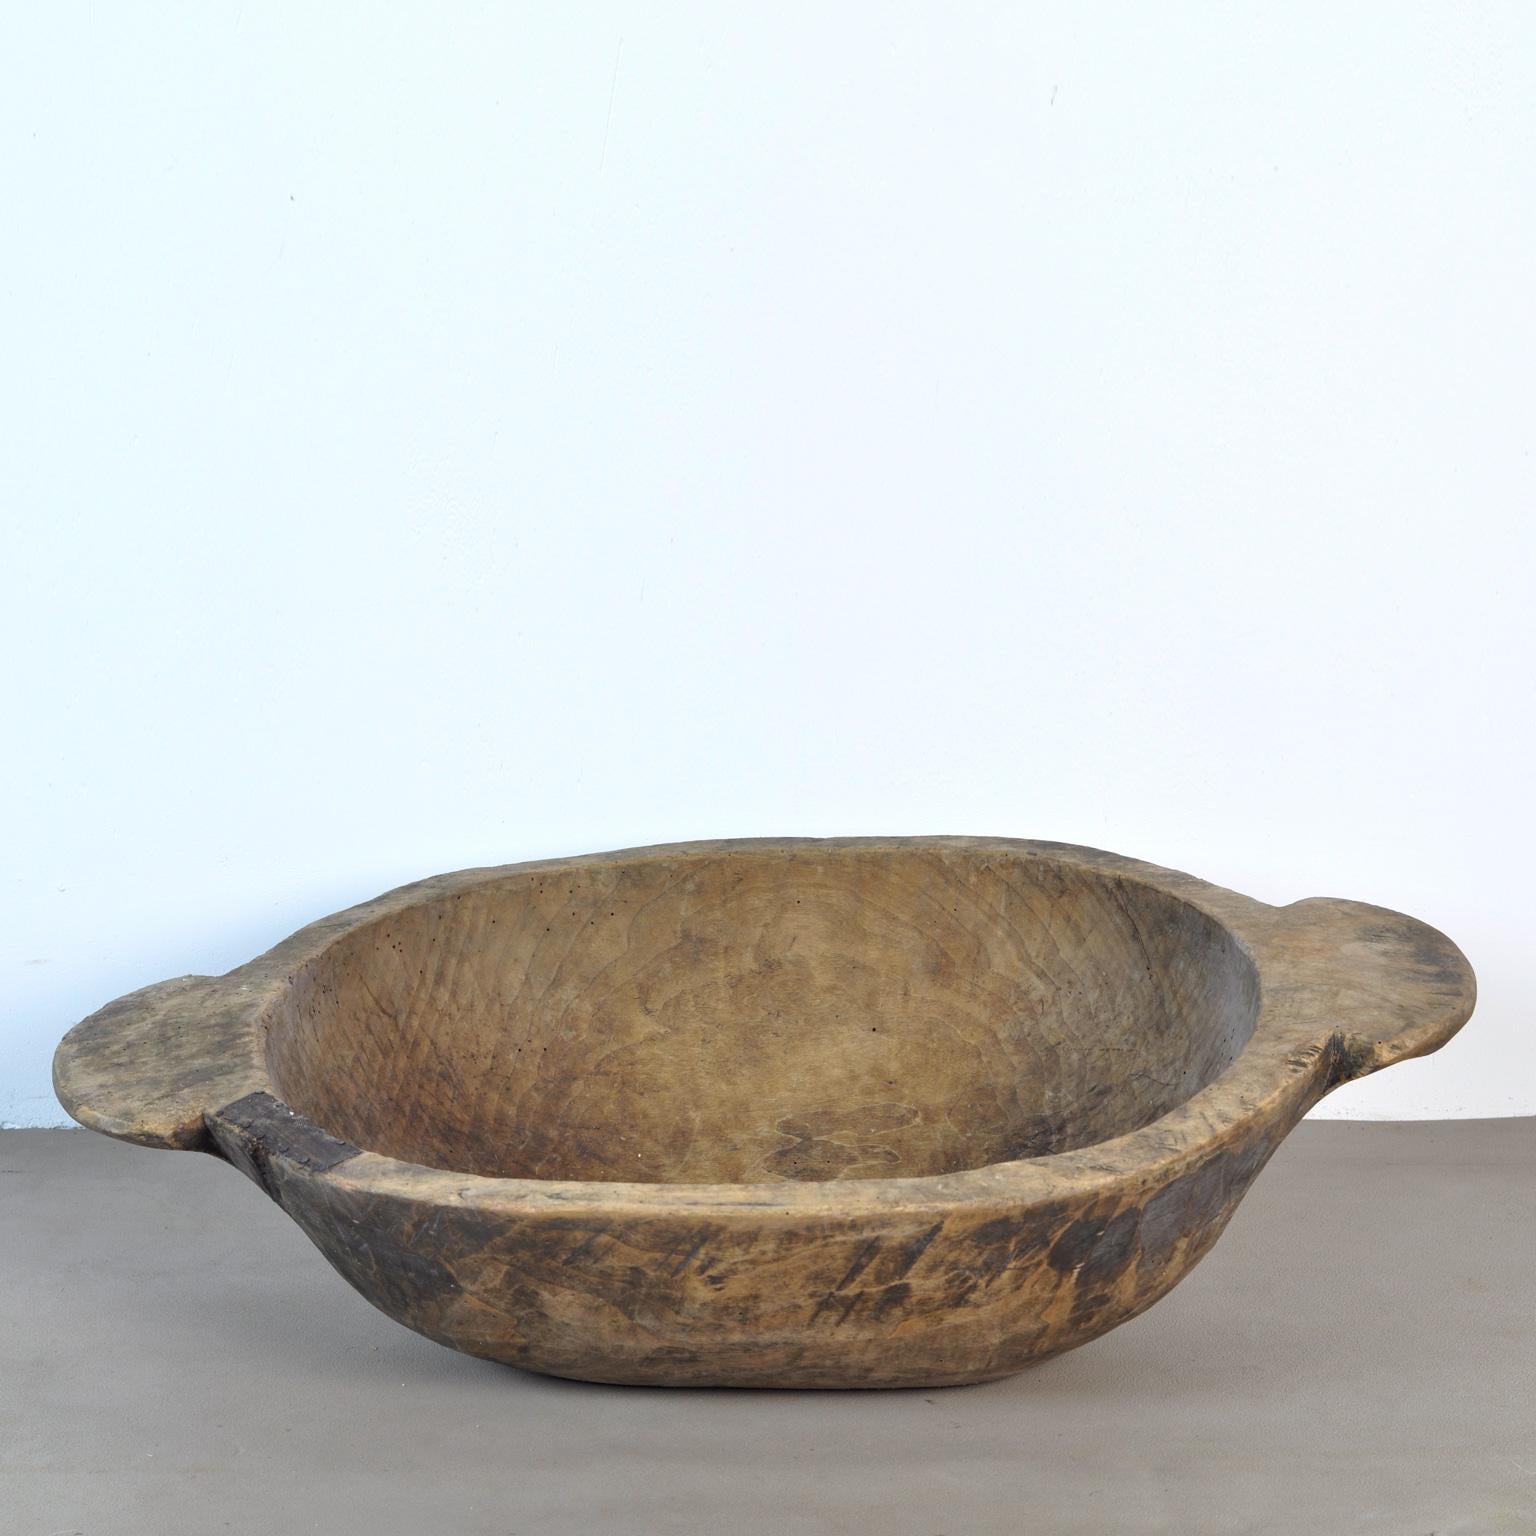 Beautiful hand carved Hungarian dough bowl, 1930s
In good rustic condition. As with all vintage items there will be signs of wear and tear from use over the years.
2 repairs have been done in the past with small pieces of metal to reinforce the